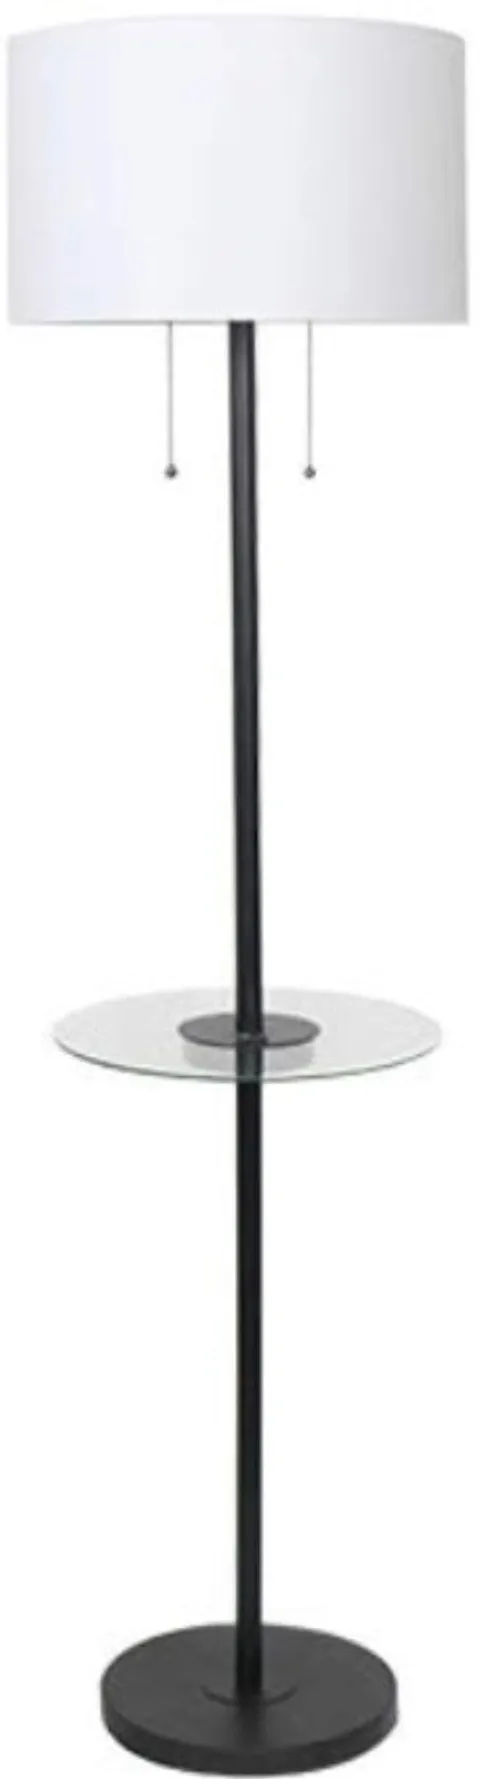 Matte Black Metal Floor Lamp with USB and Glass Tray 61"H